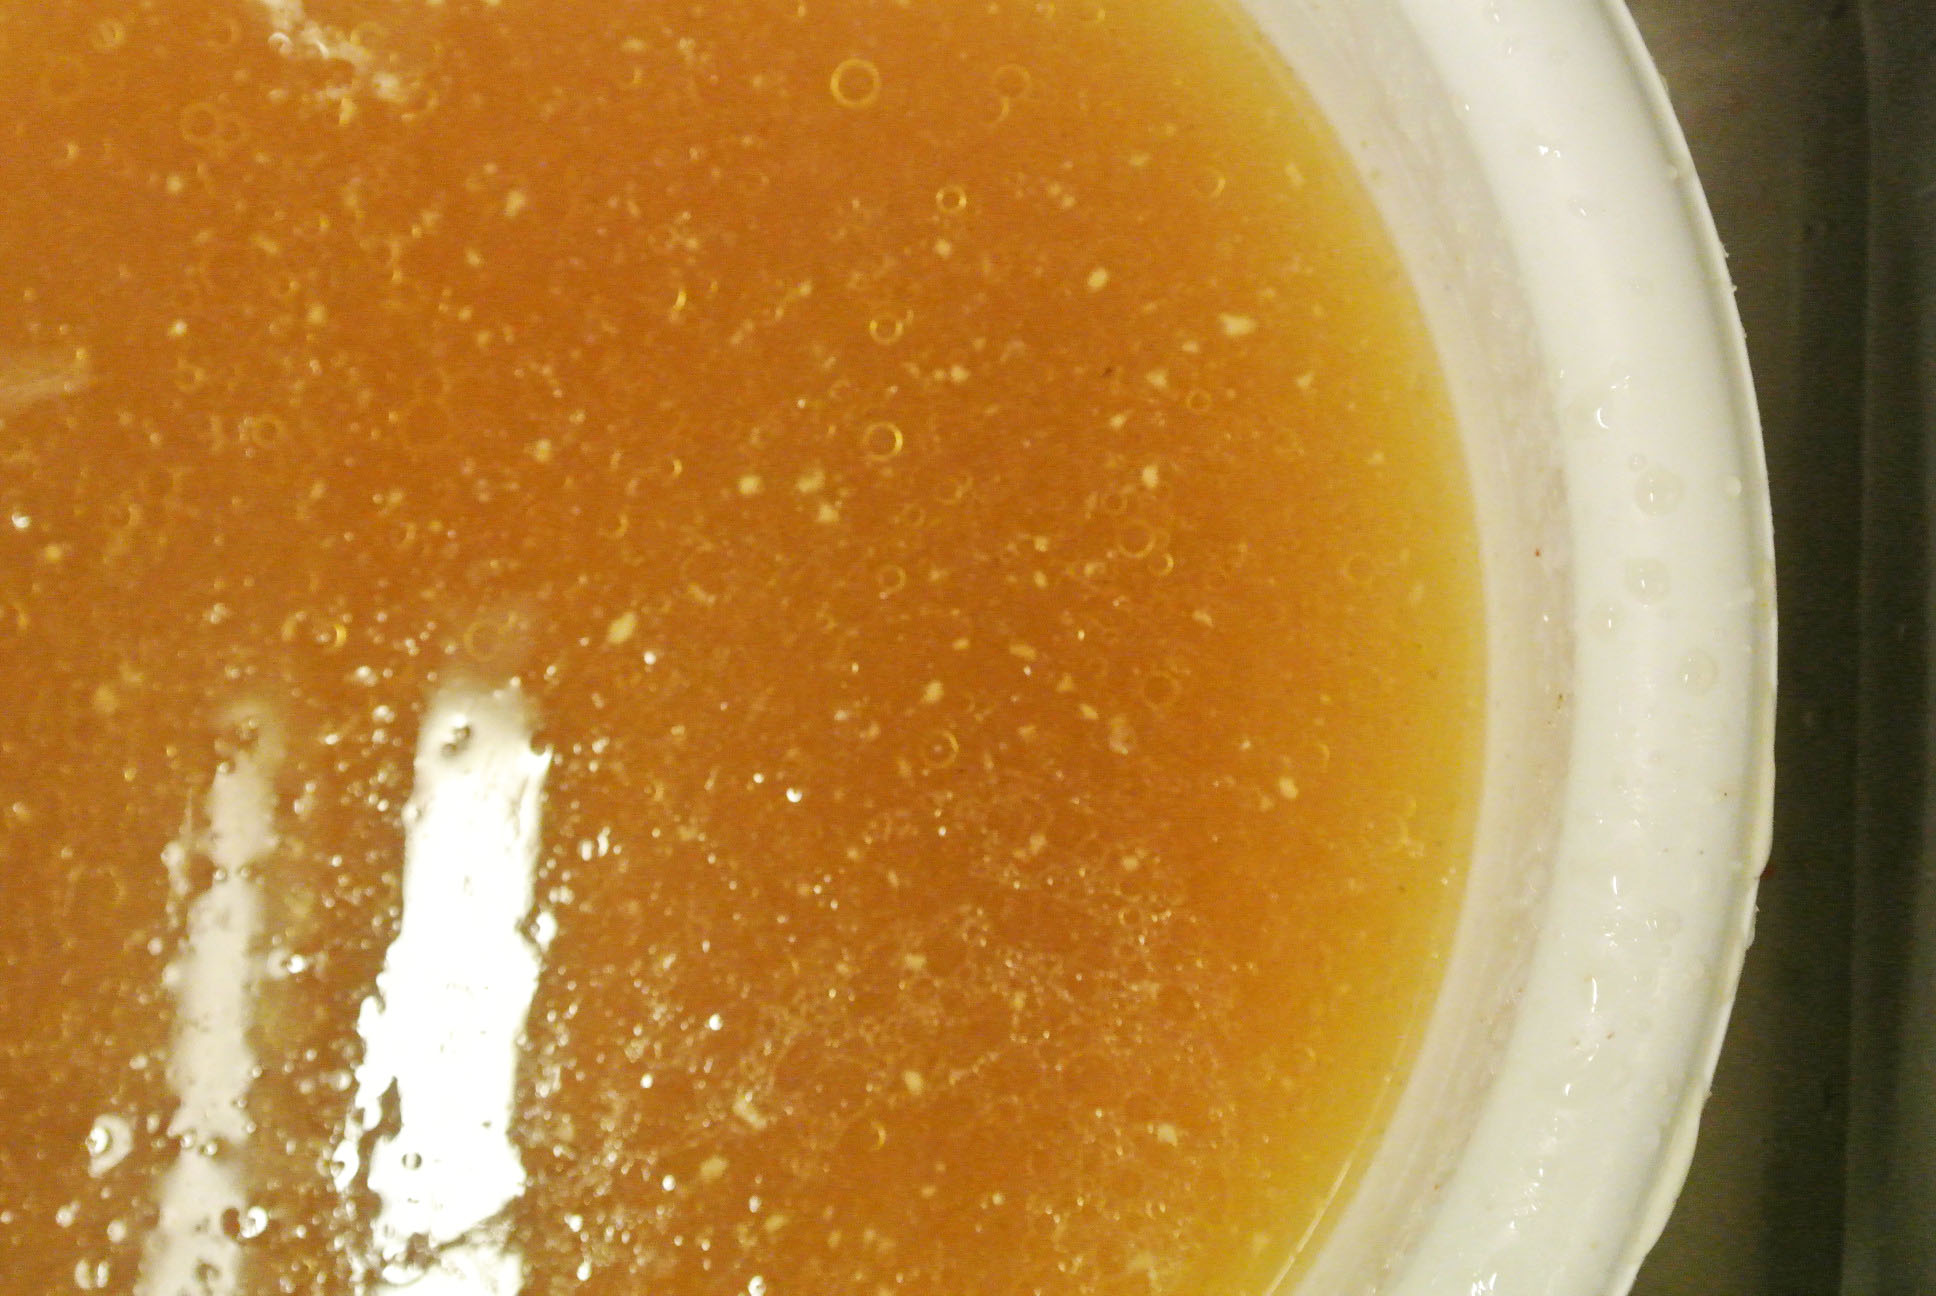 Homemade Chicken Broth made in a Crock Pot